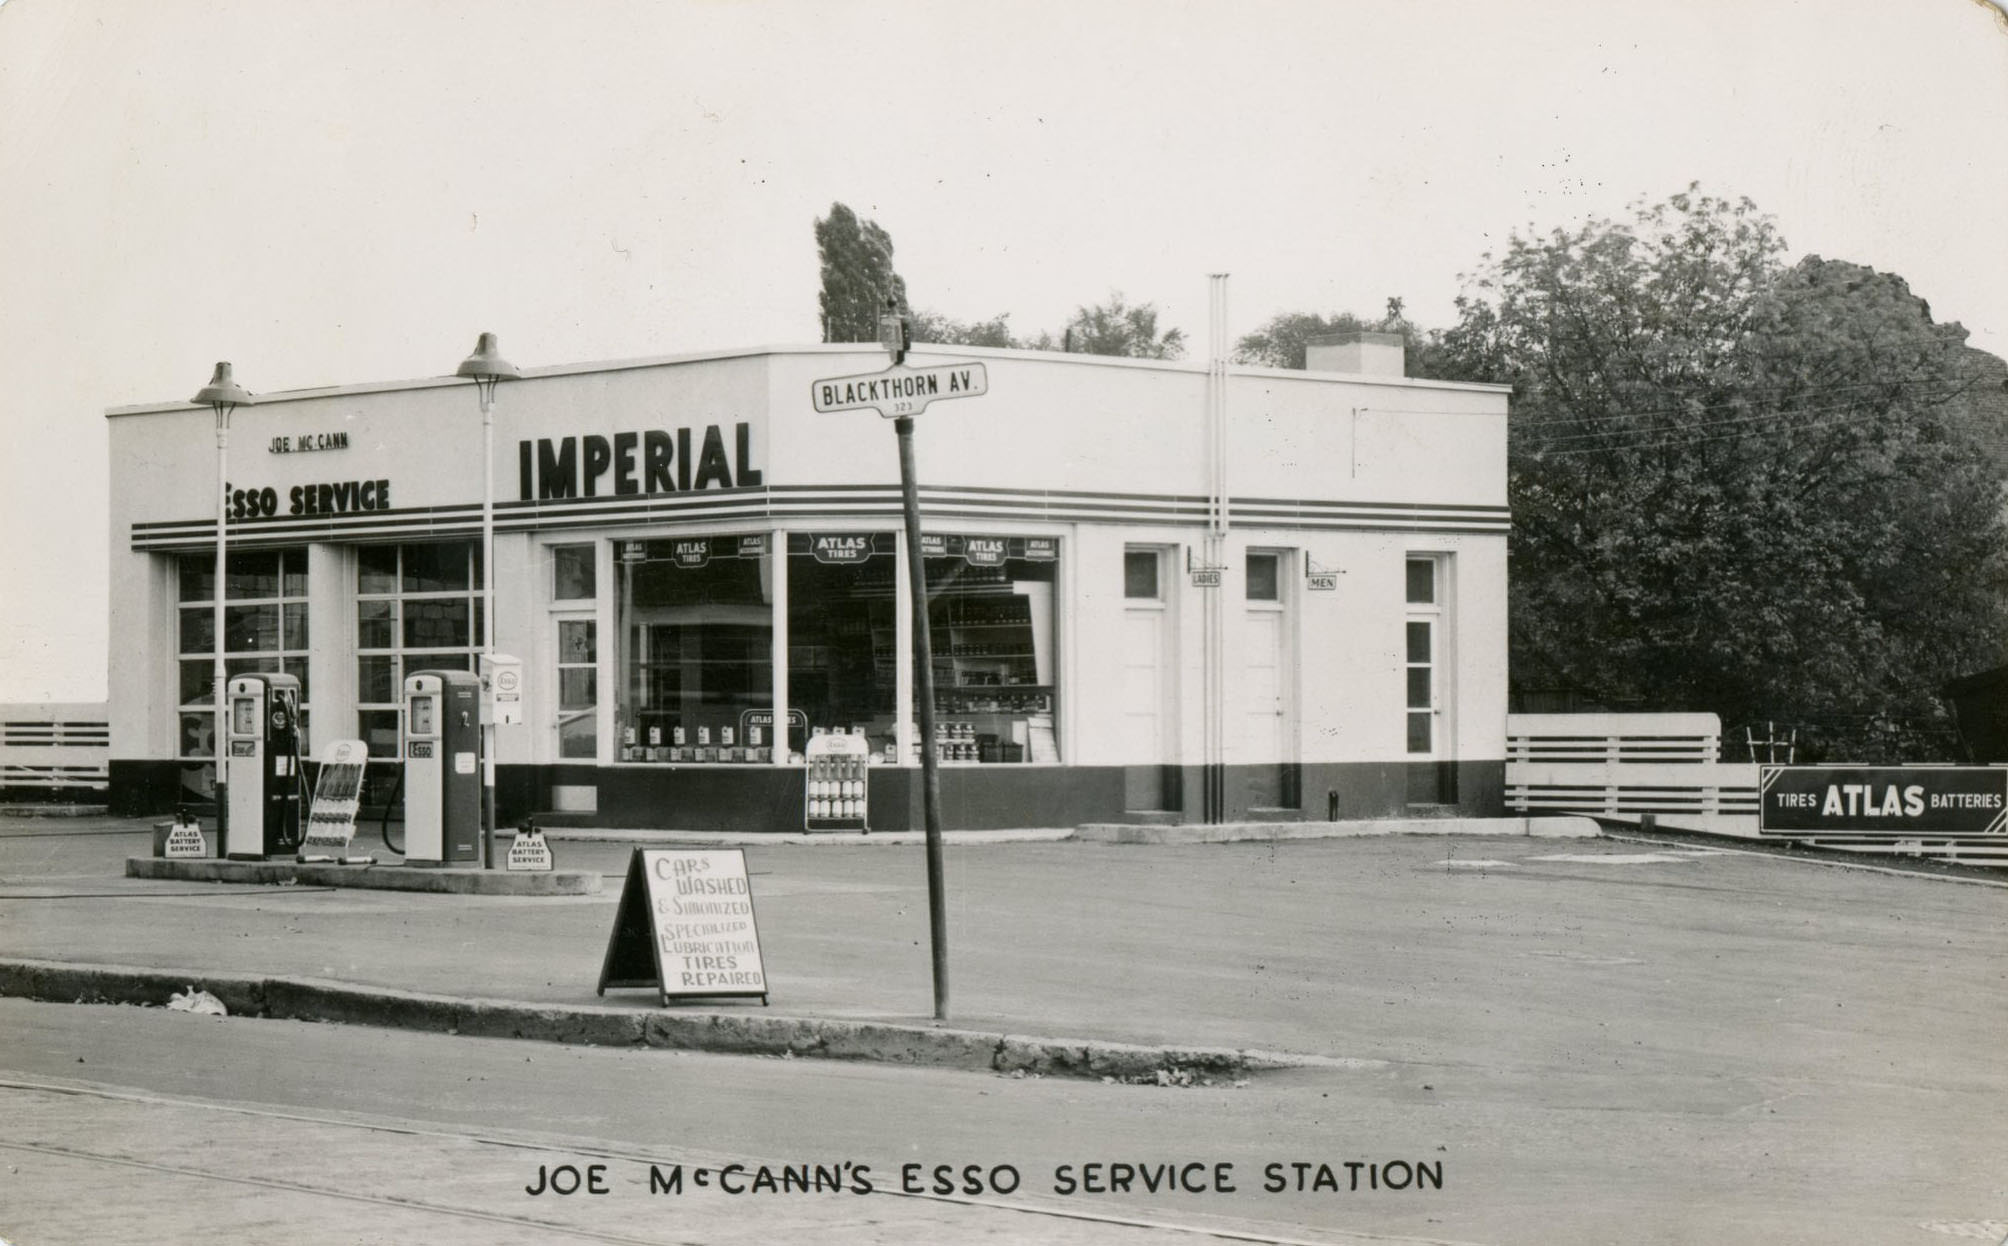 The station is on the south side of Rogers Road, 1950s